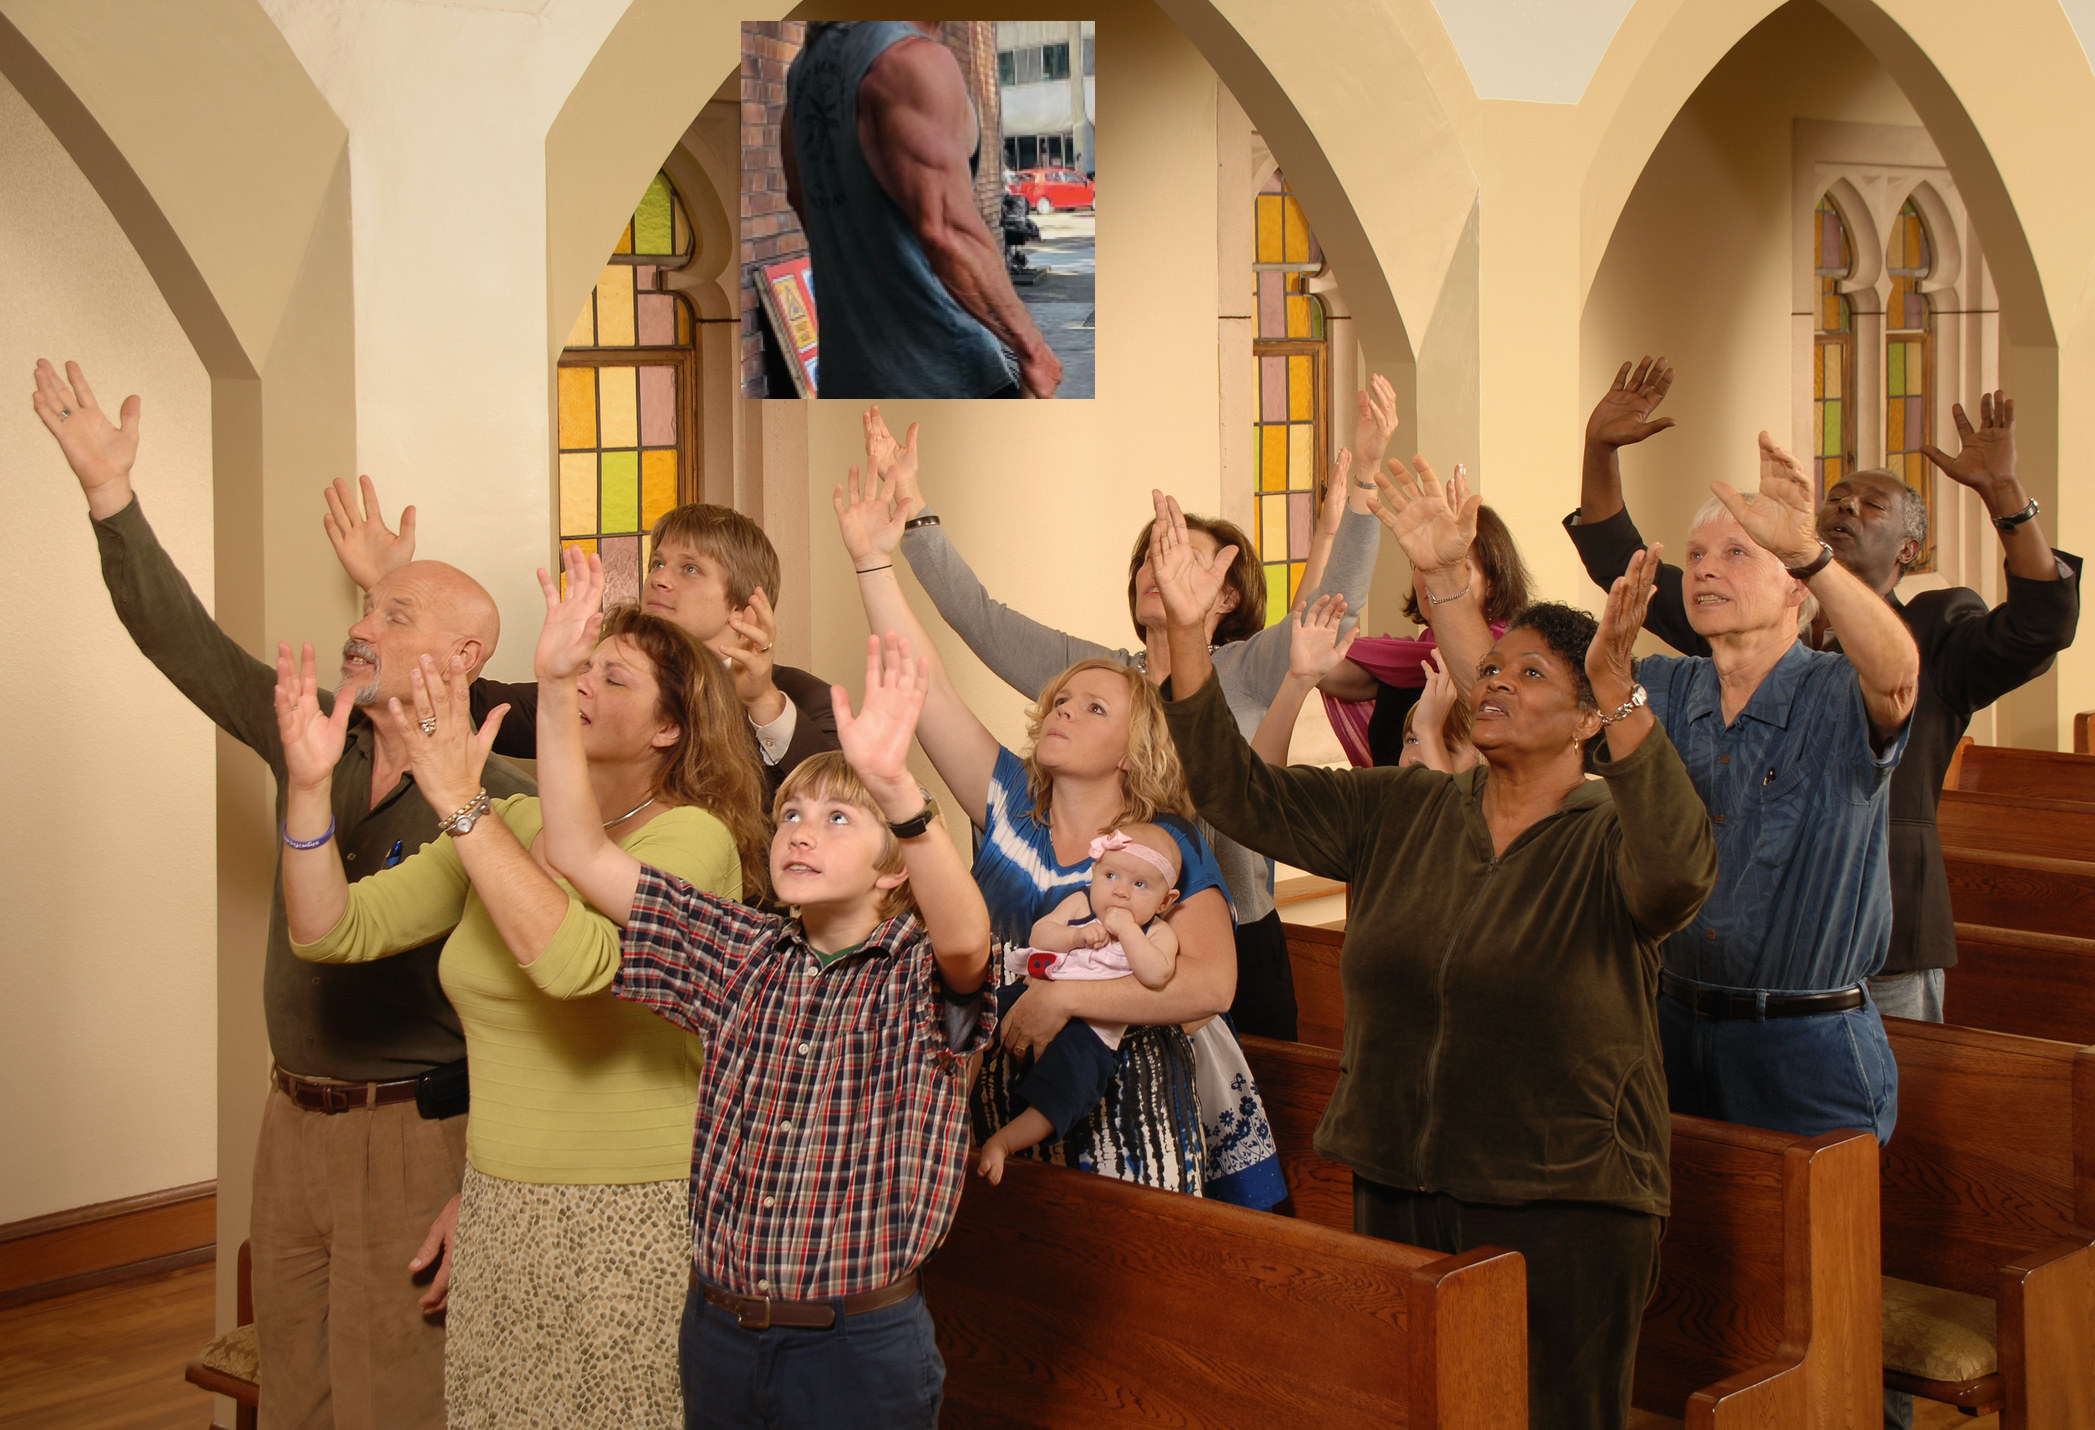 People in church with their arms raised to the sky